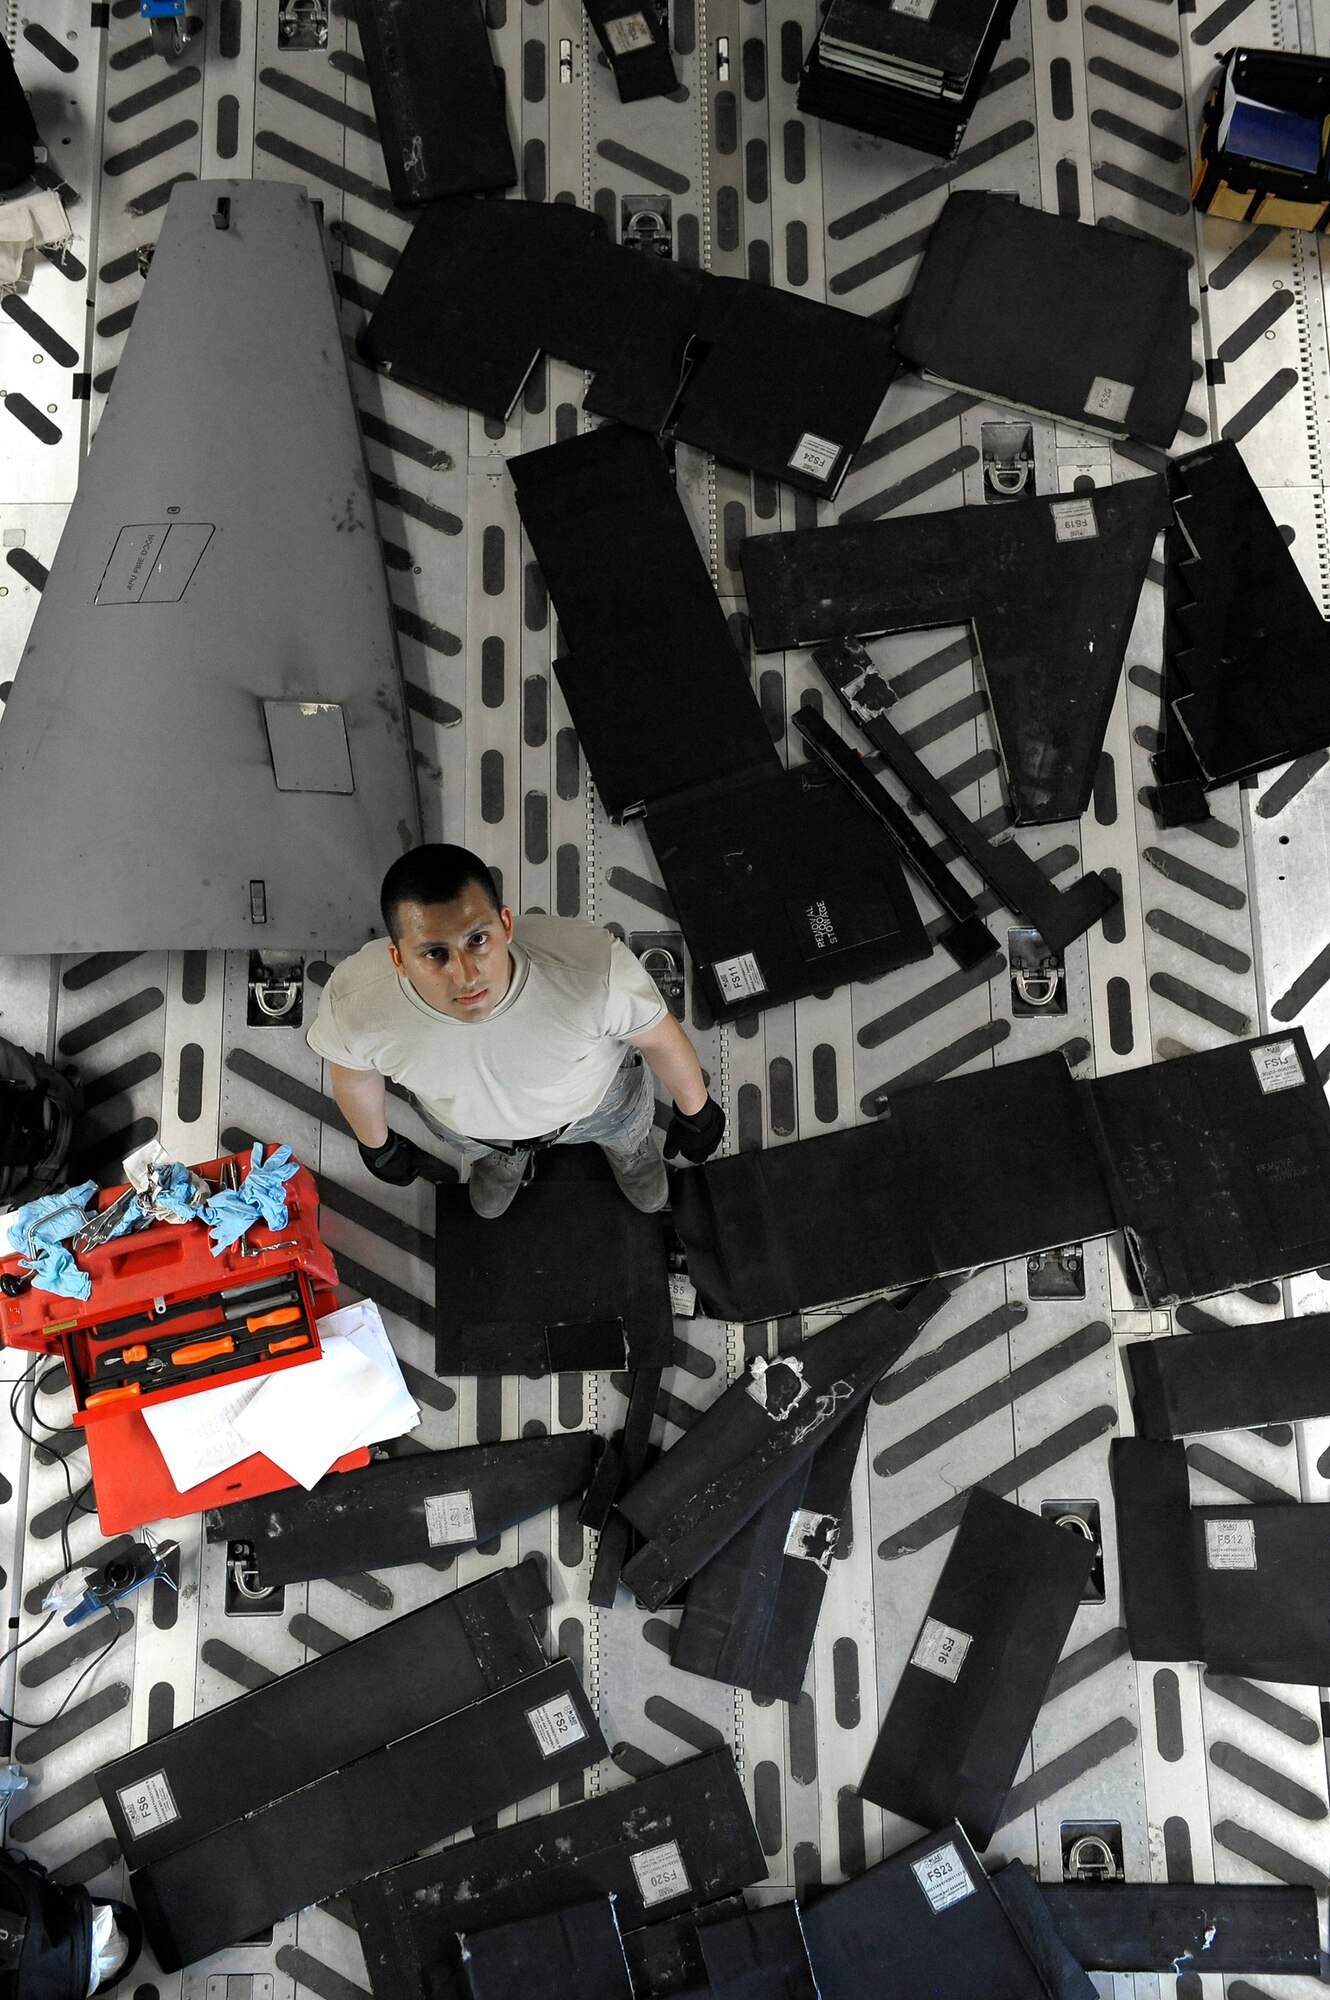 ELMENDORF AIR FORCE BASE, Alaska -- Airman 1st Class Manuel Pakilla stands down below surrounded by pieces of bulletproof mats that will be used to surround the cockpit area June 29. Padilla is part of an 11-man crew that is preparing for the Air Mobility Command Rodeo at McChord Air Force Base, Wash., July 18-26. (U.S. Air Force photo/Master Sgt. Keith Brown)